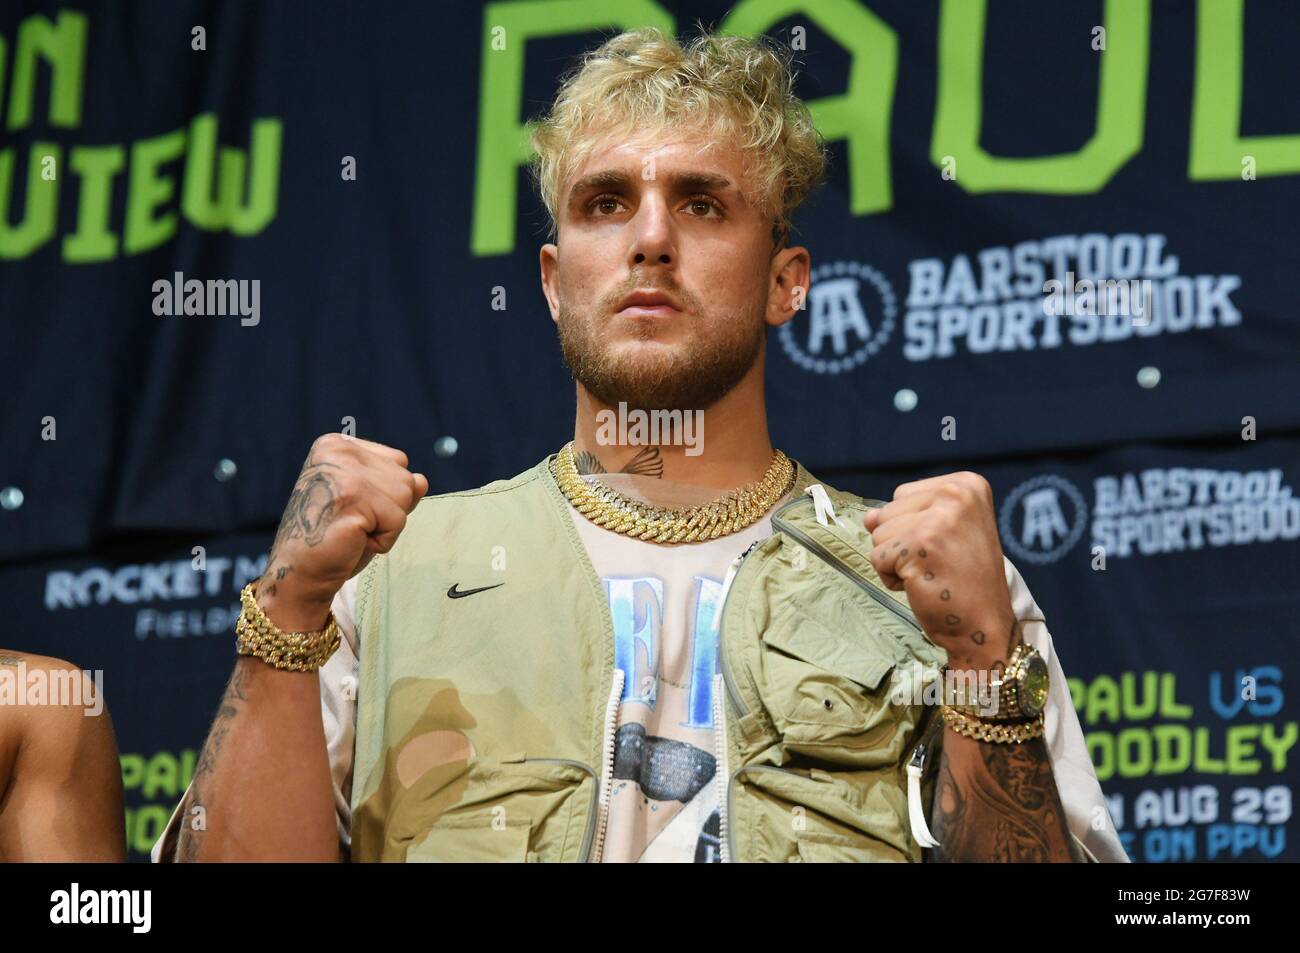 Los Angeles, USA. 13th July, 2021. Jake Paul at the JAKE PAUL VS. TYRON WOODLEY Los Angeles Press Conference held at The Novo at L.A. LIVE in Los Angeles, CA on Tuesday, ?July 13, 2021. (Photo By Sthanlee B. Mirador/Sipa USA) Credit: Sipa USA/Alamy Live News Stock Photo